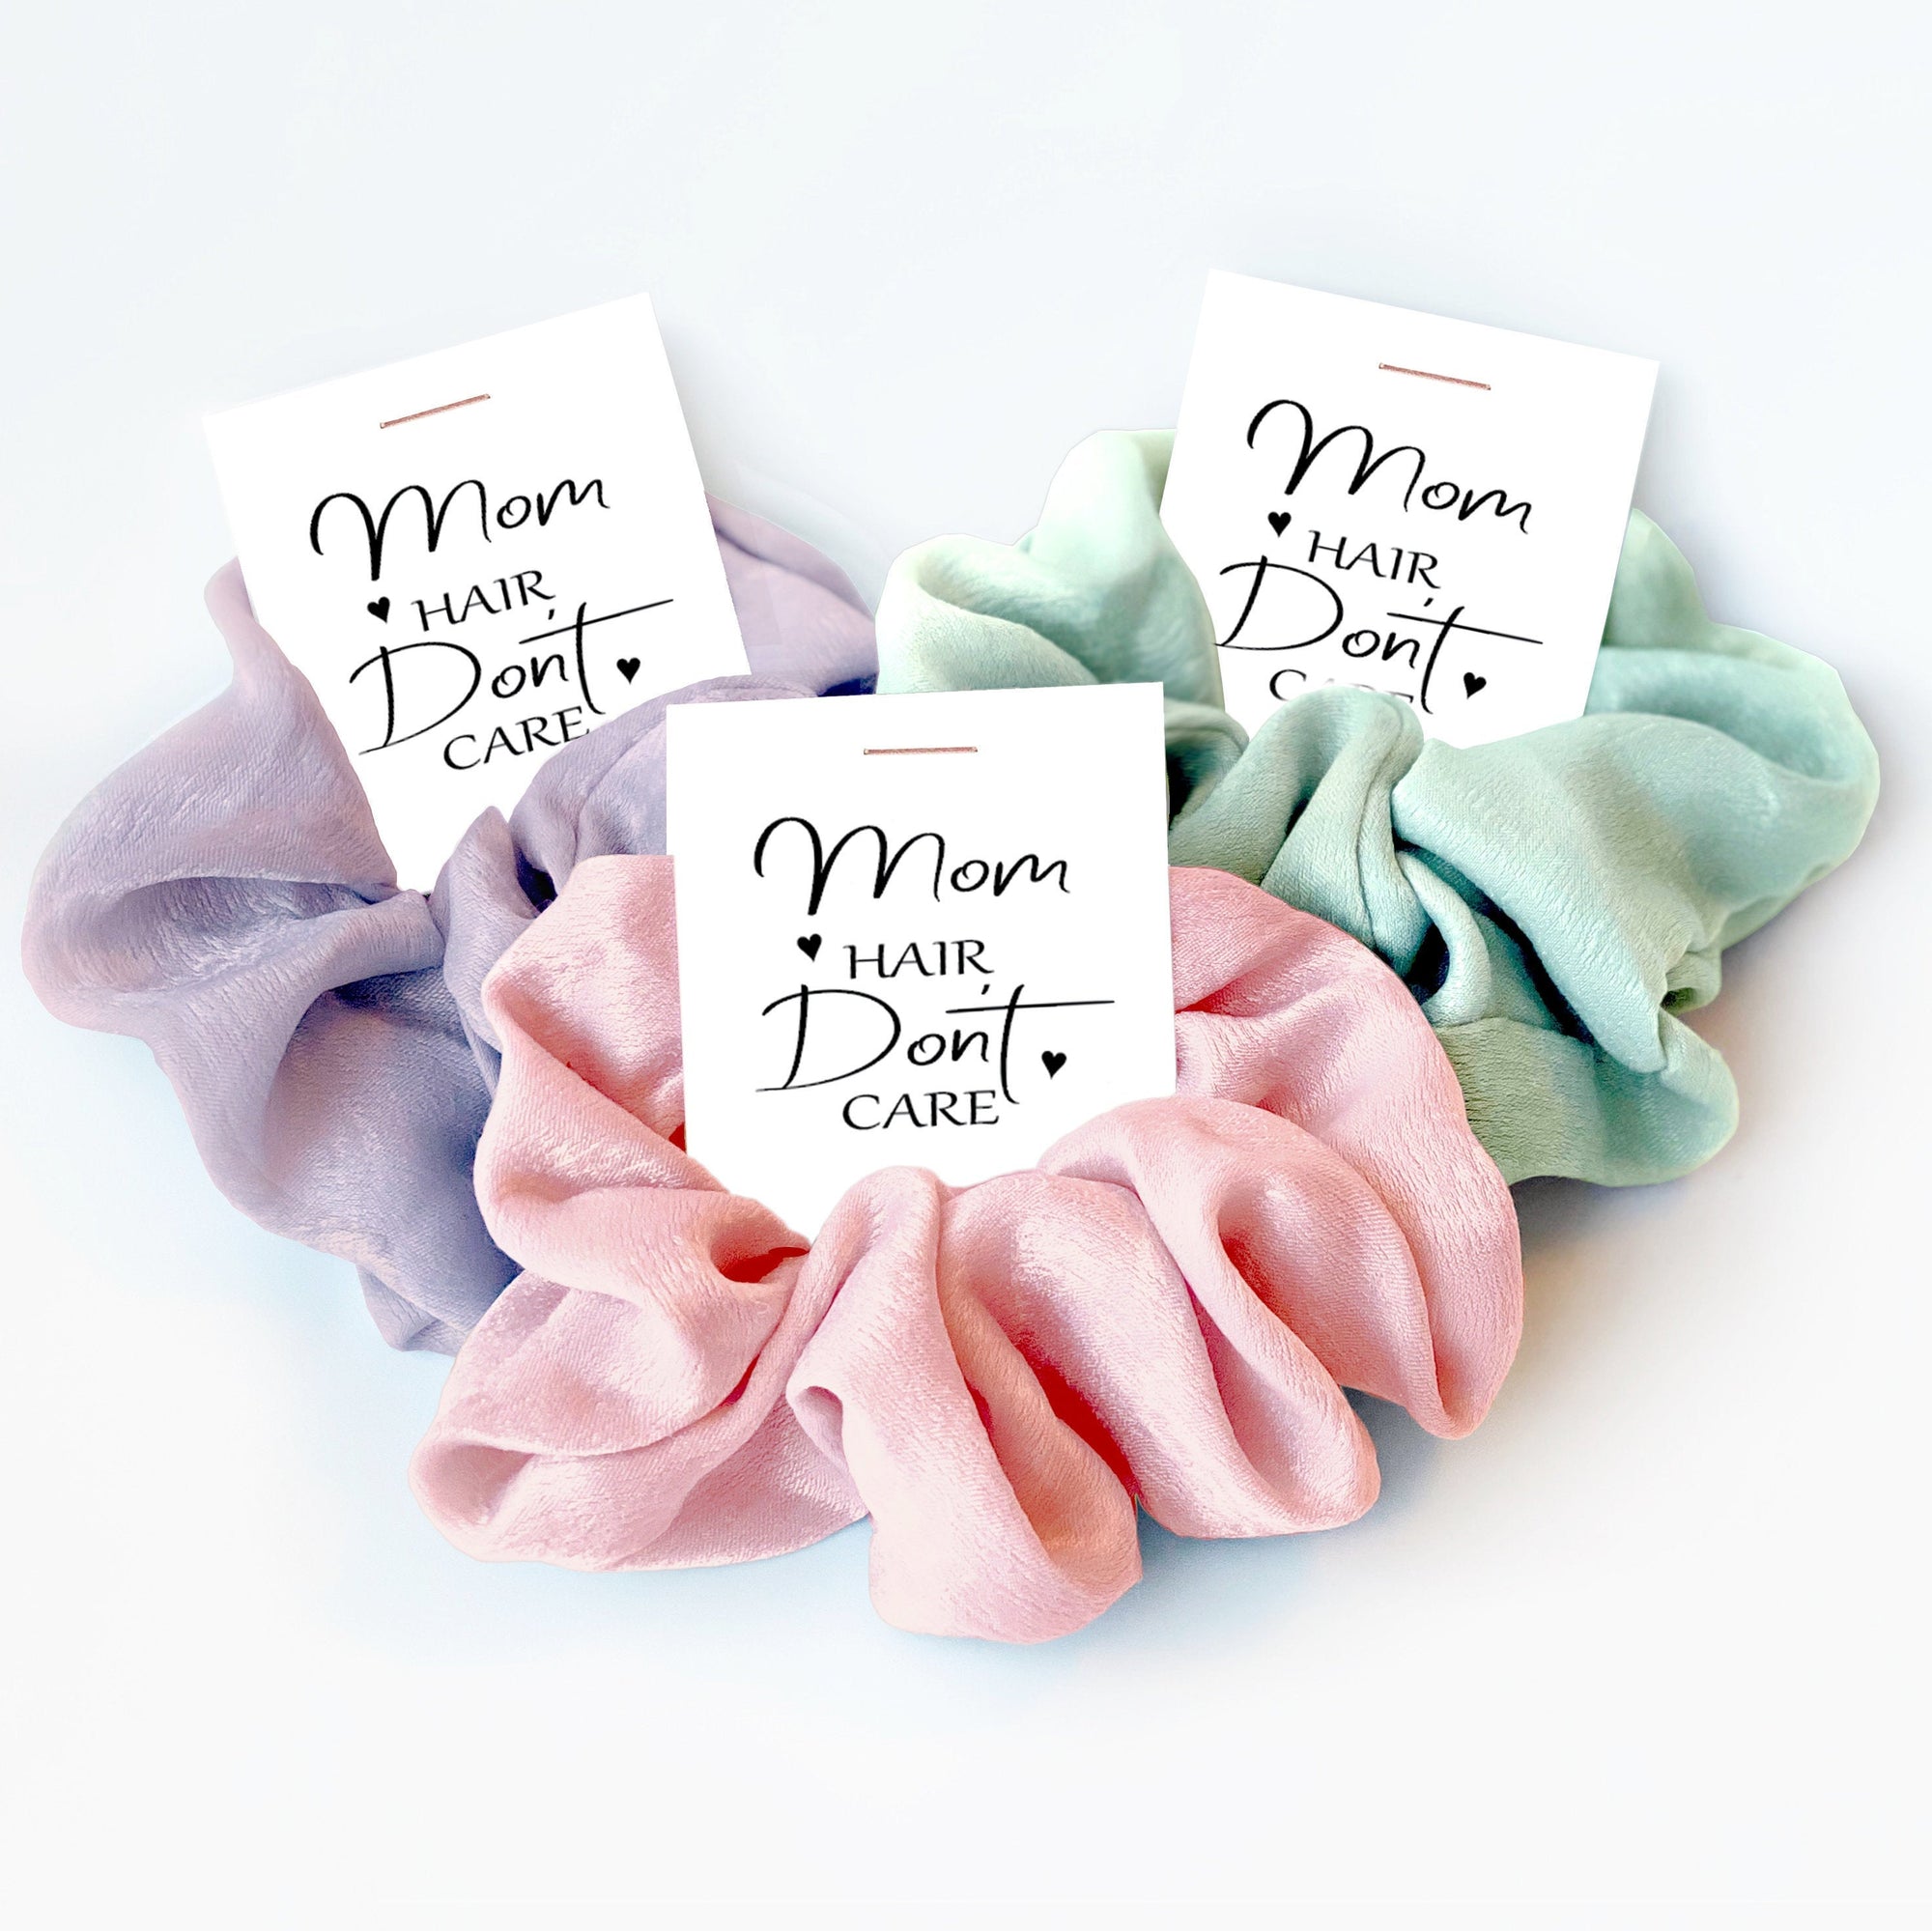 Mothers Day Gift Hair Scrunchie, Mother&#39;s Day Gift, Mothers Day Box Items, 1st Mothers Day Gift, New Mom Gift, Mom Hair Don&#39;t Care